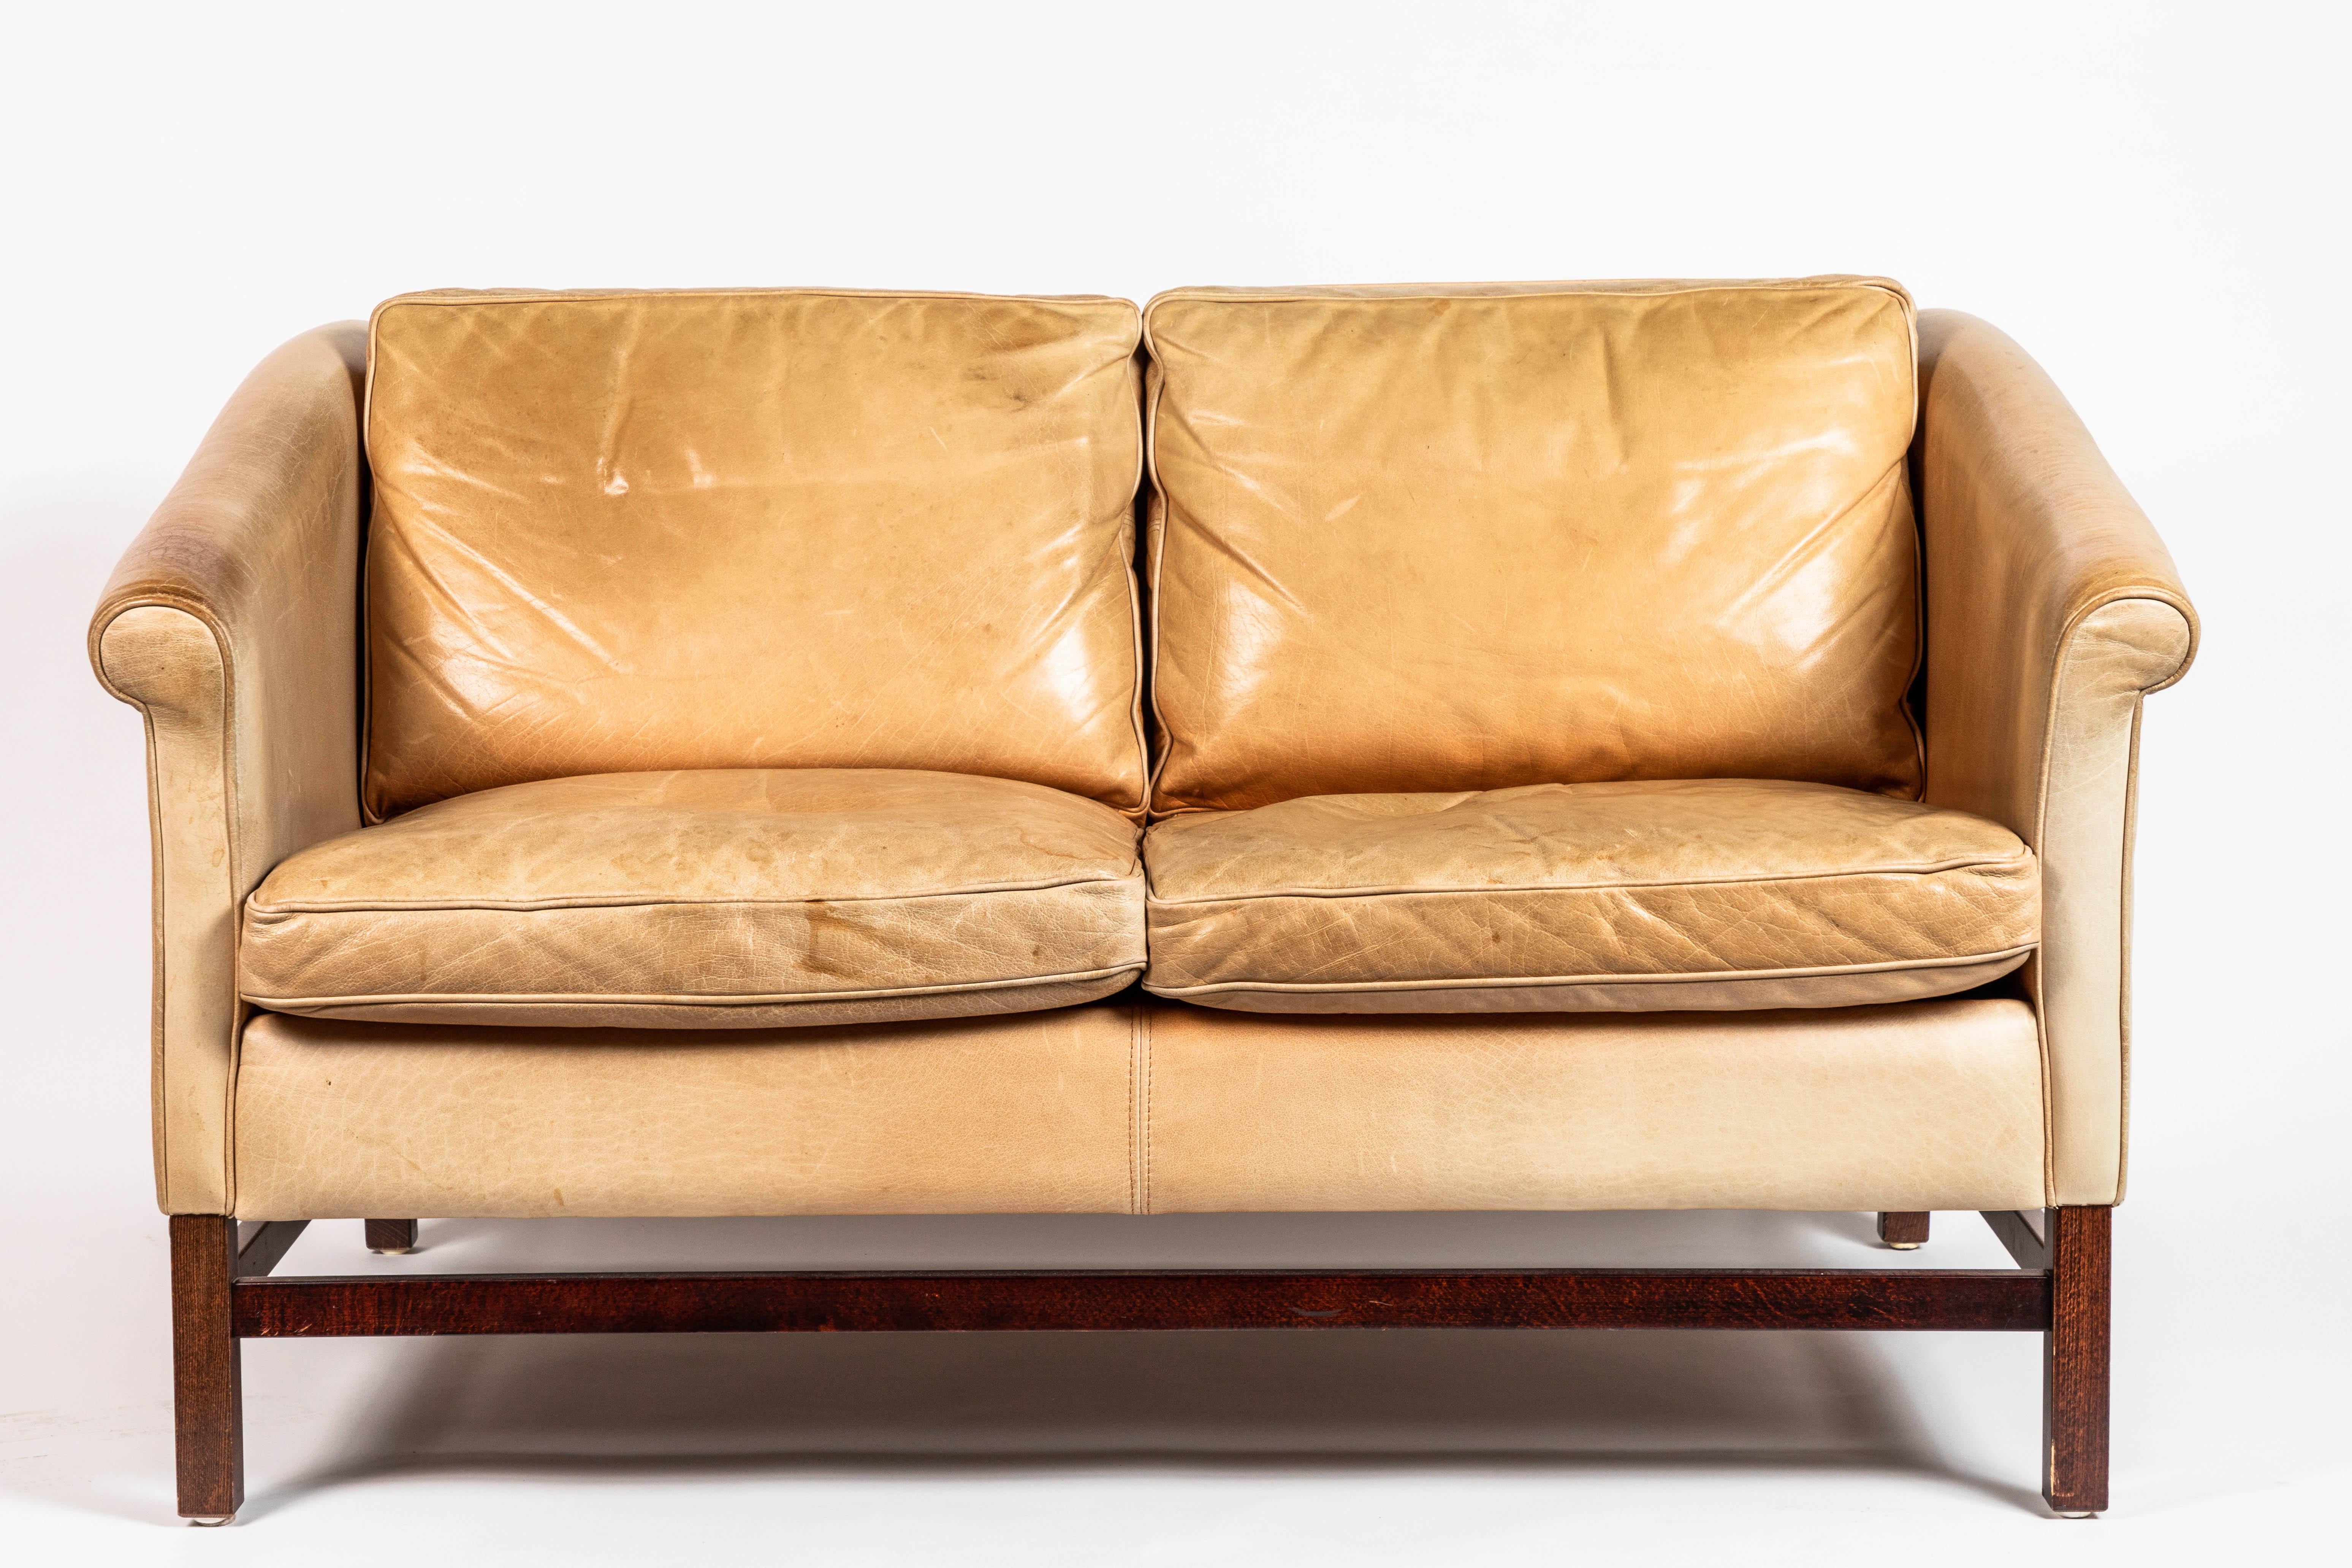 Danish leather and mahogany sofa by Stouby, in original leather, circa 1960s. Arm height: 24.5